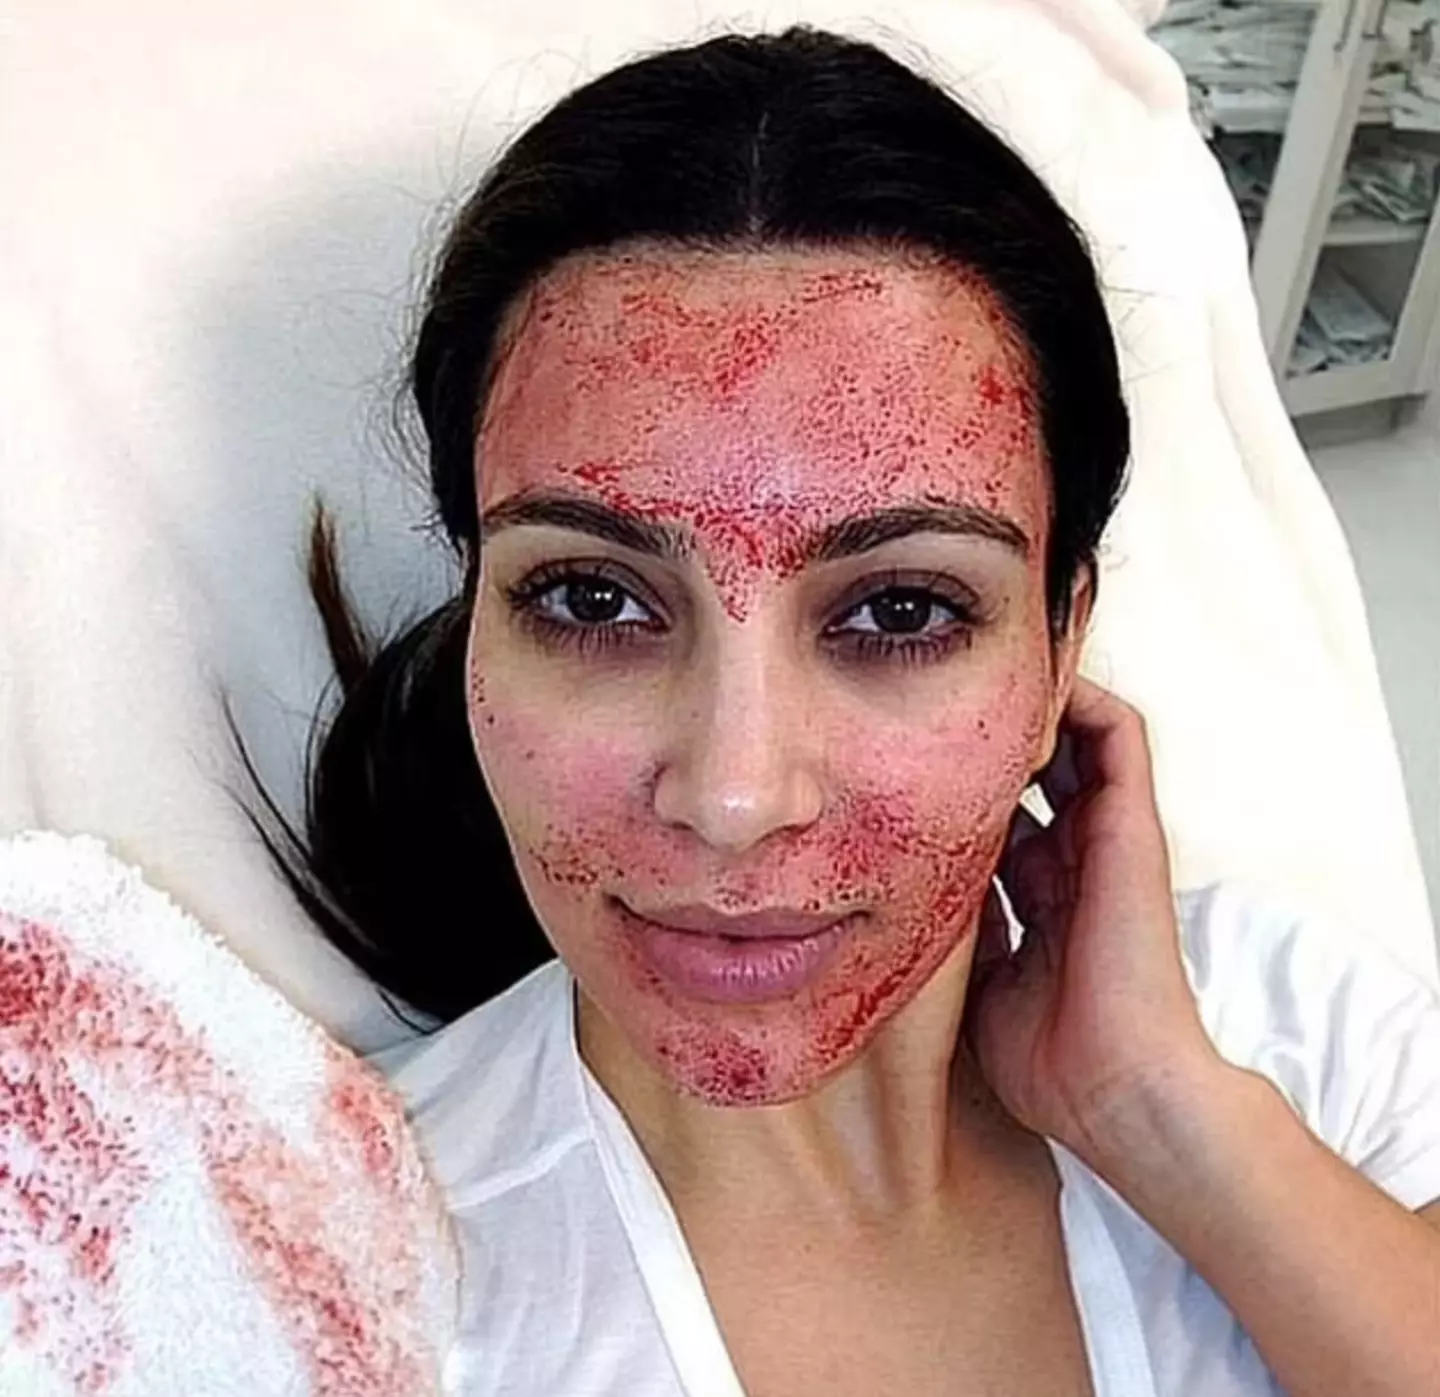 Celebrities such as Kim Kardashian are fans of 'vampire facials,' which use plasma from your own blood to promote collagen production. (Instagram/@kimkardashian)